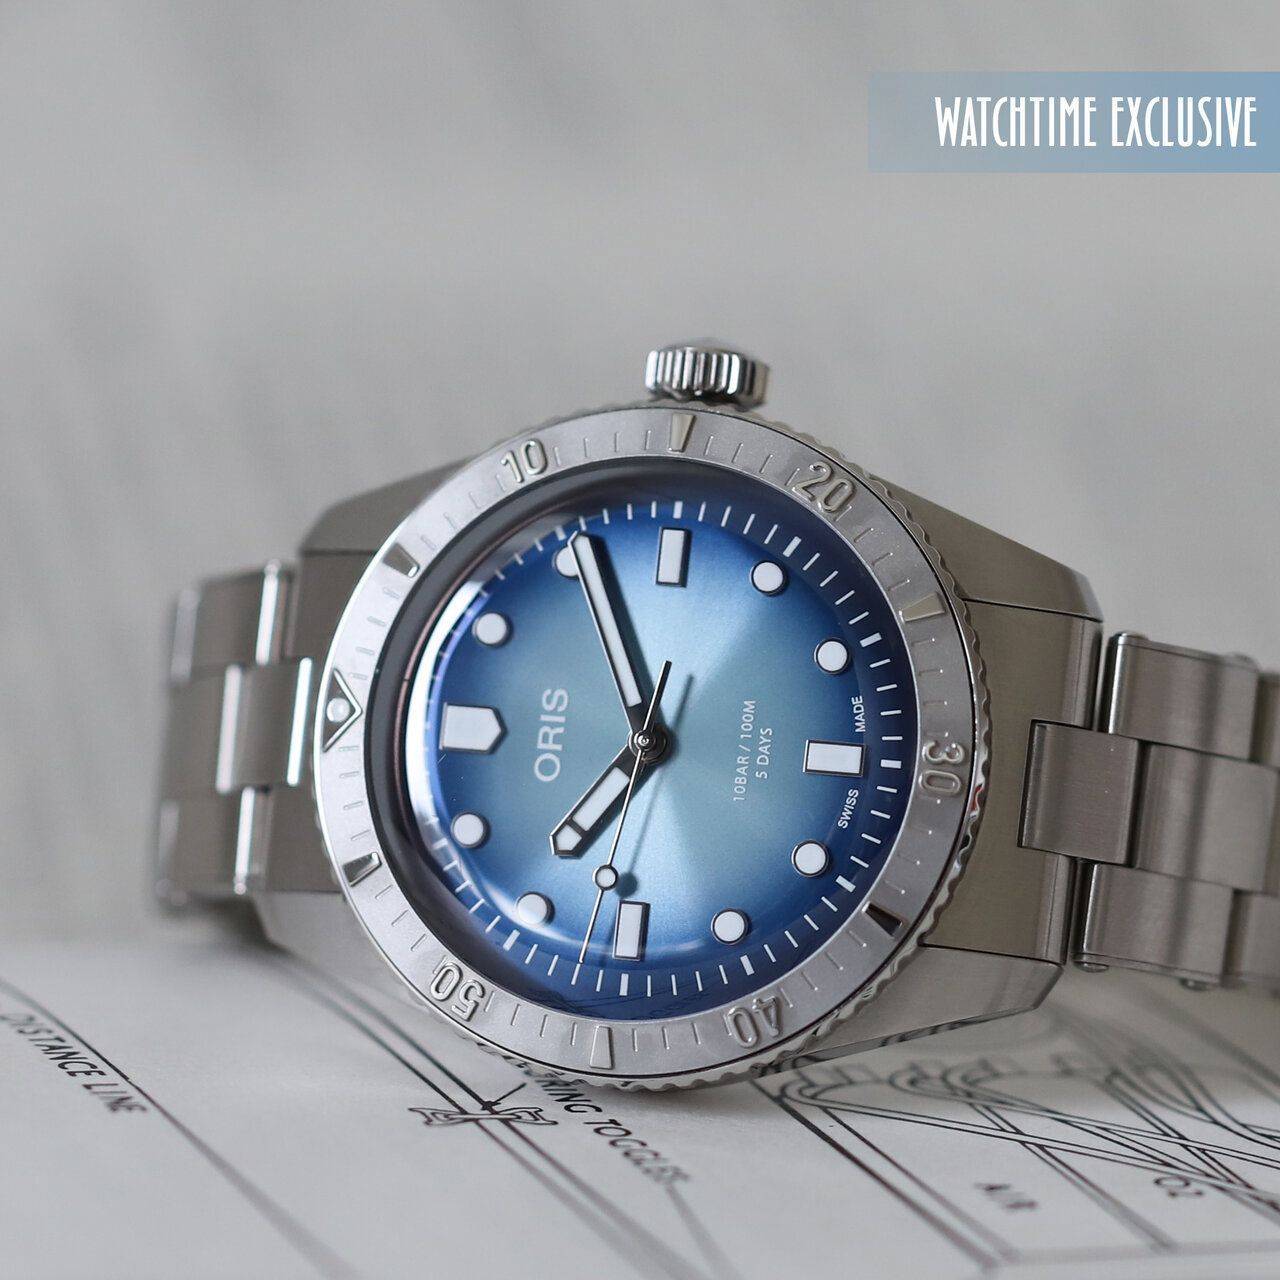 Oris_Divers_Sixty_Five_Chronos_Edition_Featured_1_2022.jpg